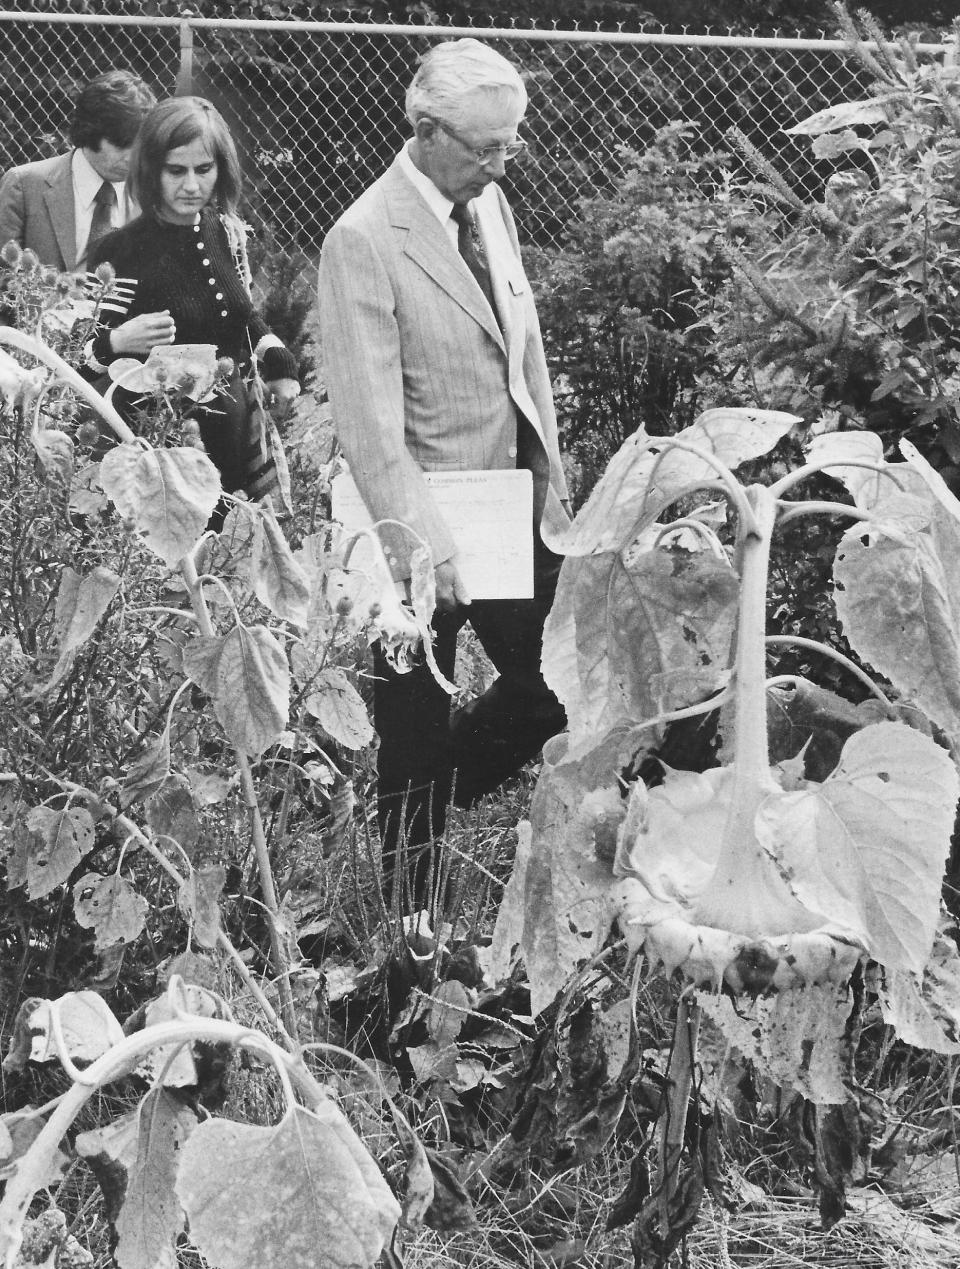 Summit County Common Pleas Judge Theodore Price inspects Nellie Shriver’s “little jungle” in the backyard of her Madrid Drive home in Akron in 1973.